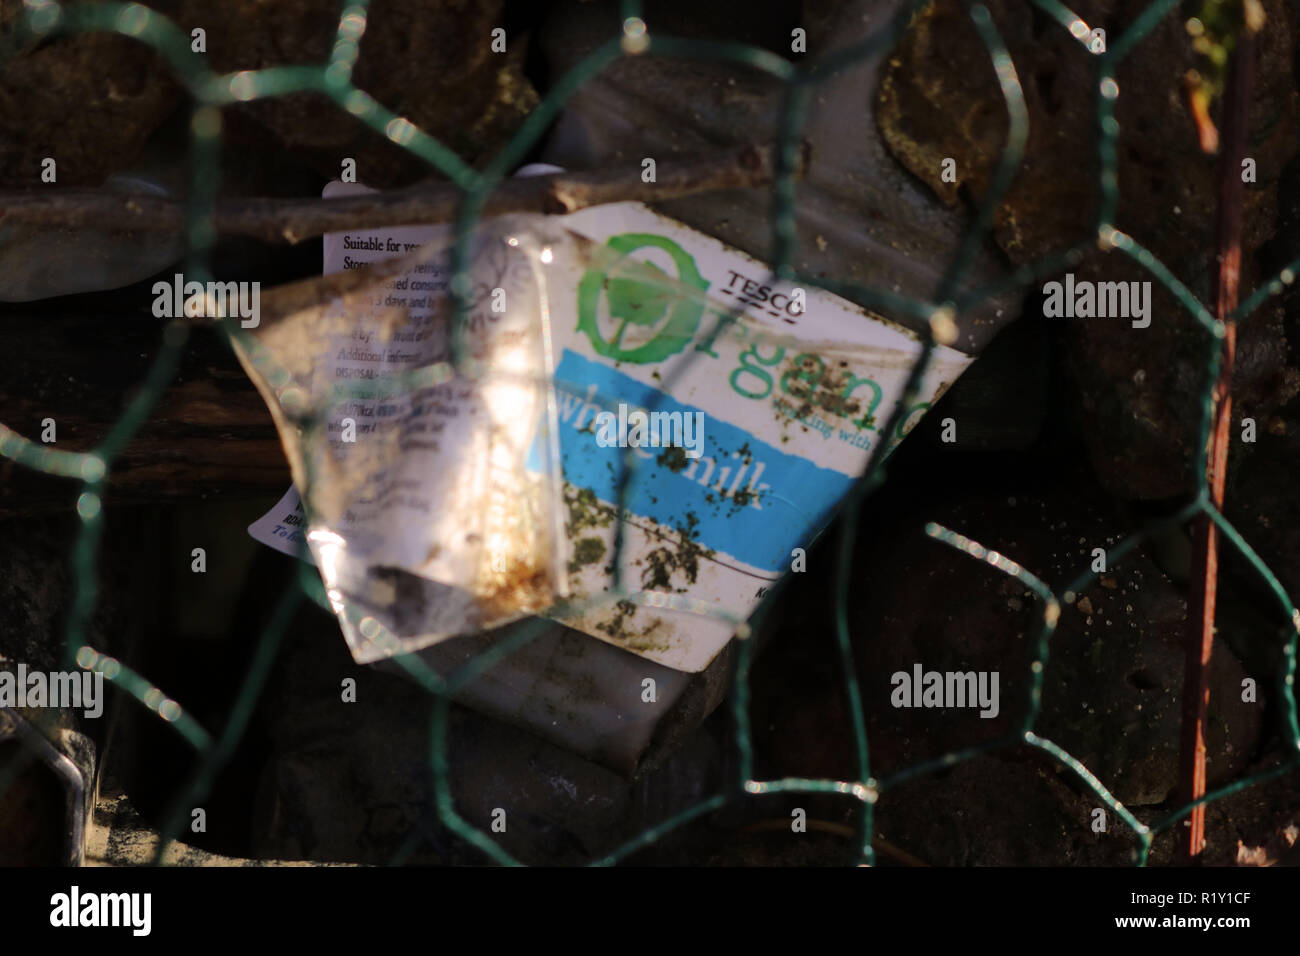 Plastic milk bottle found in the River Thames to show the high use of Plastic used in the environment, shot behind green wire. Stock Photo